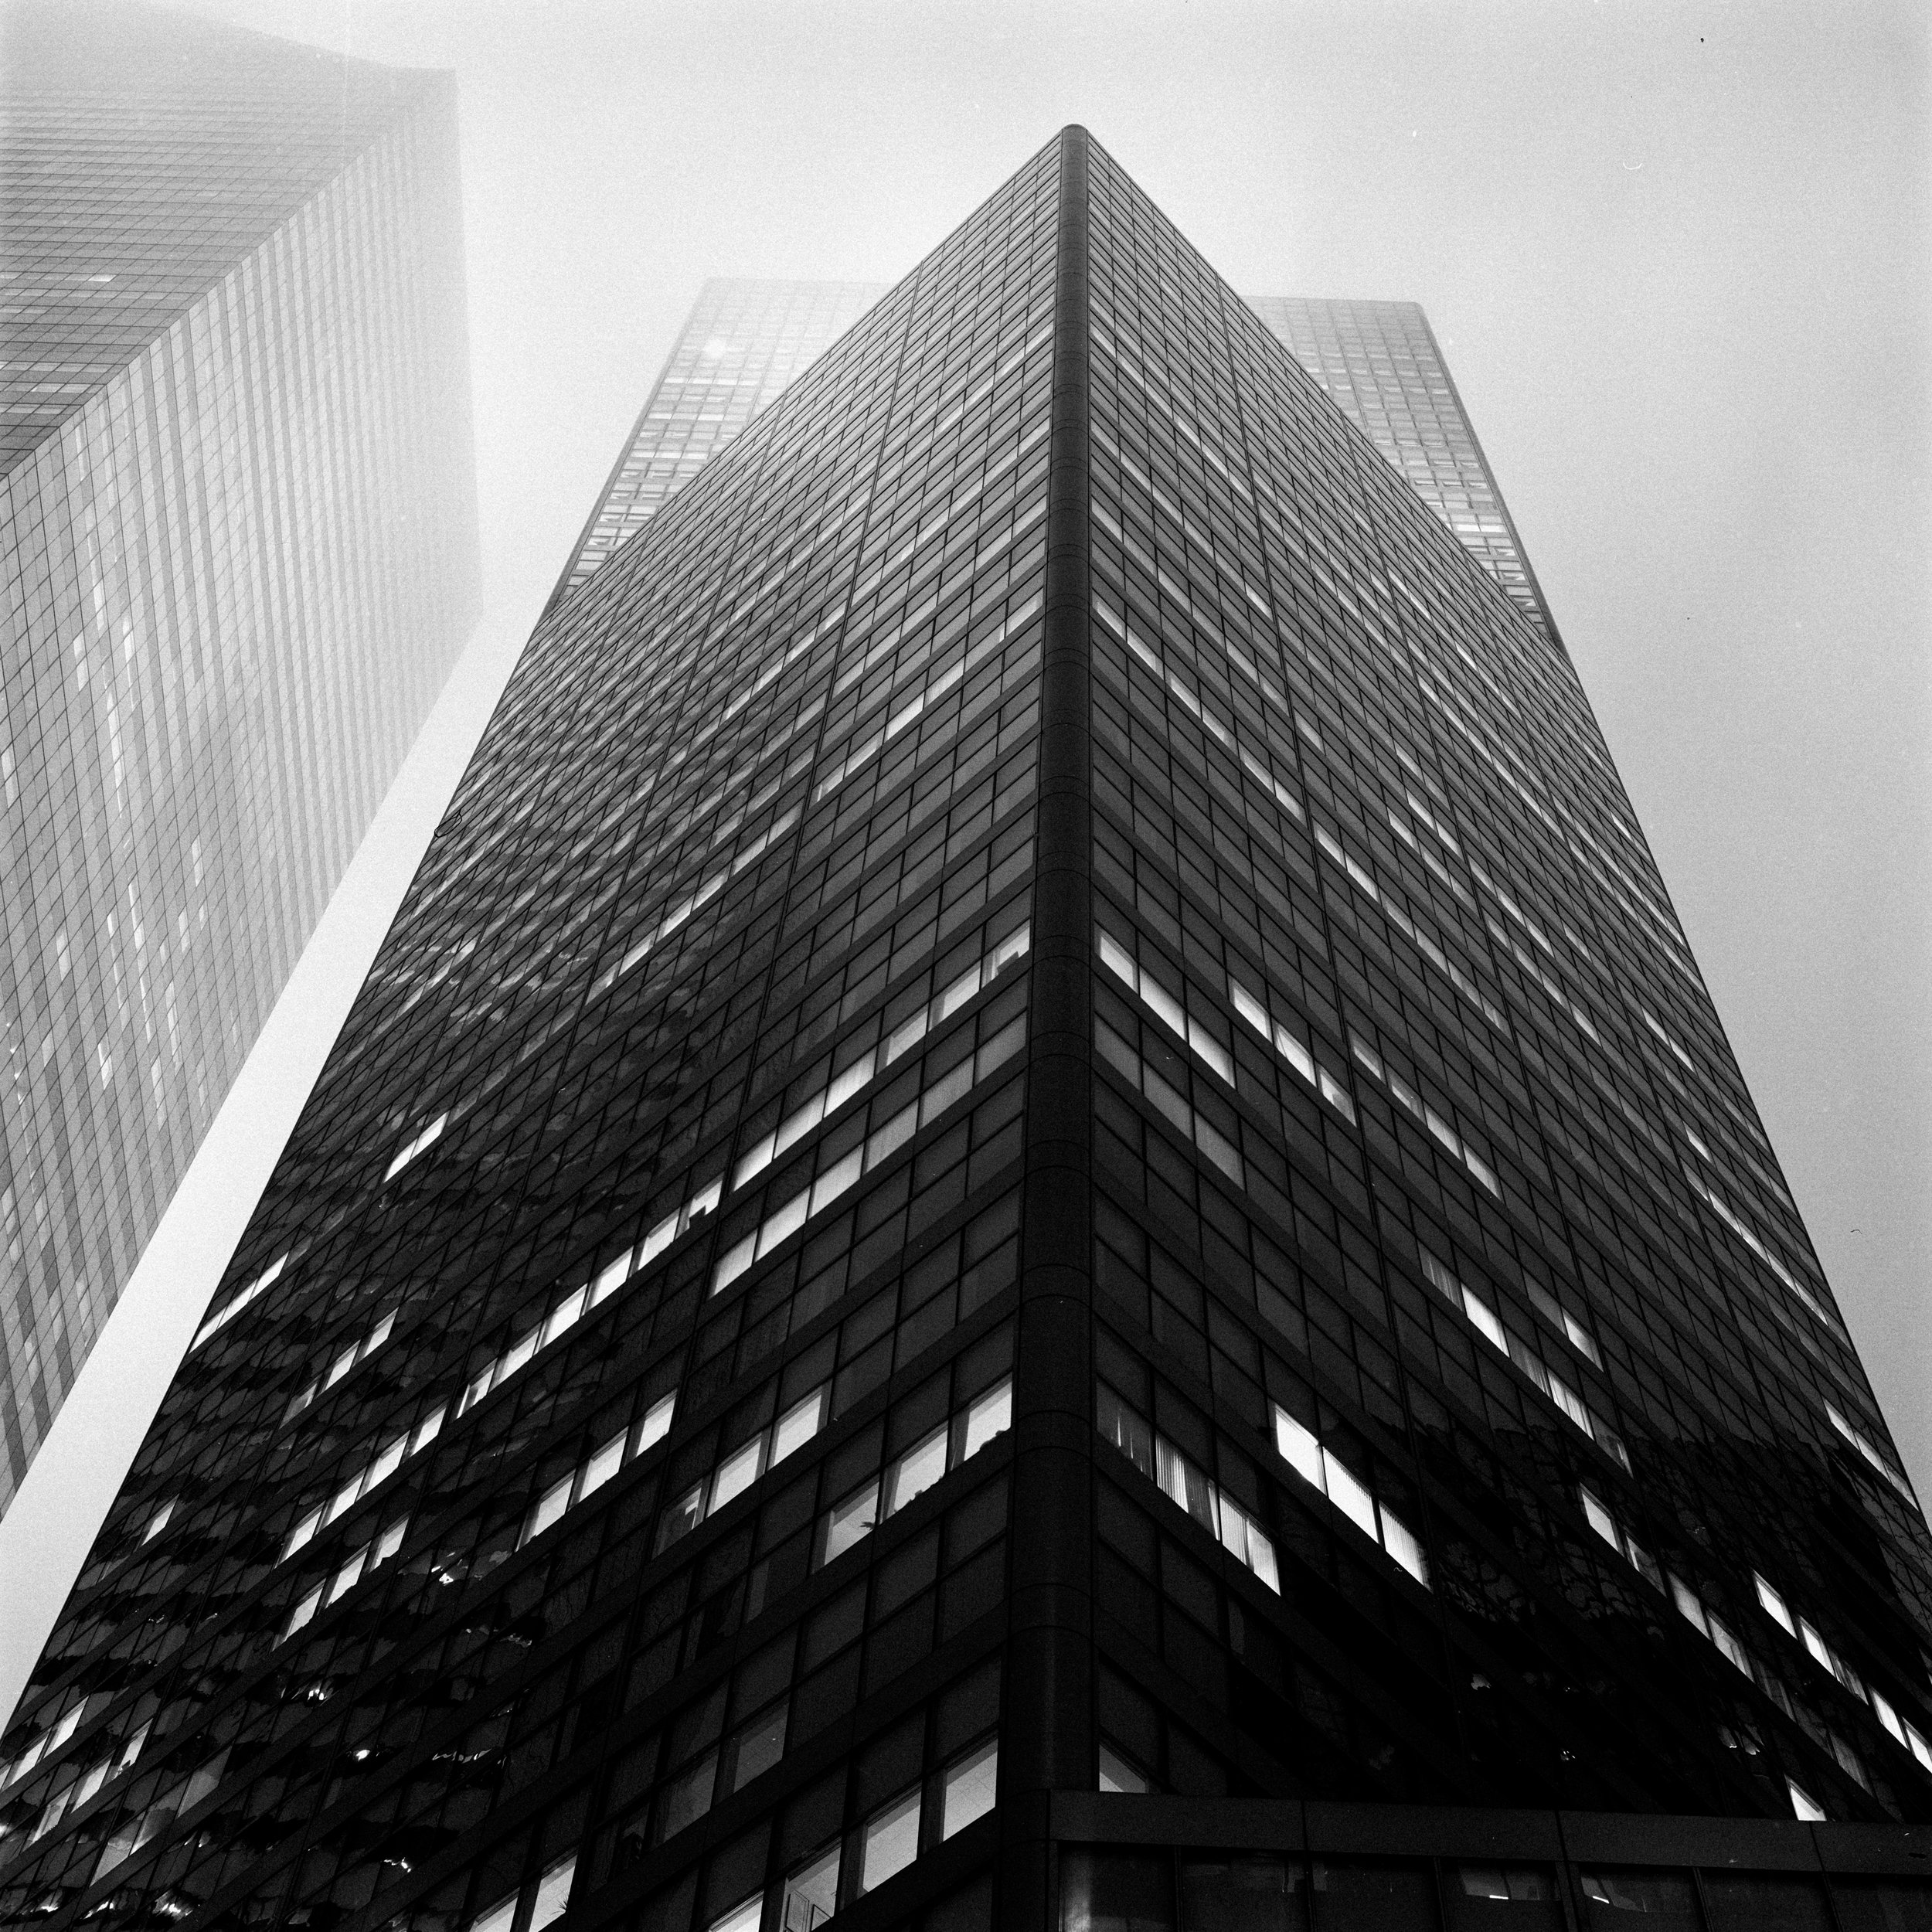 nycarchitecture-41.jpg